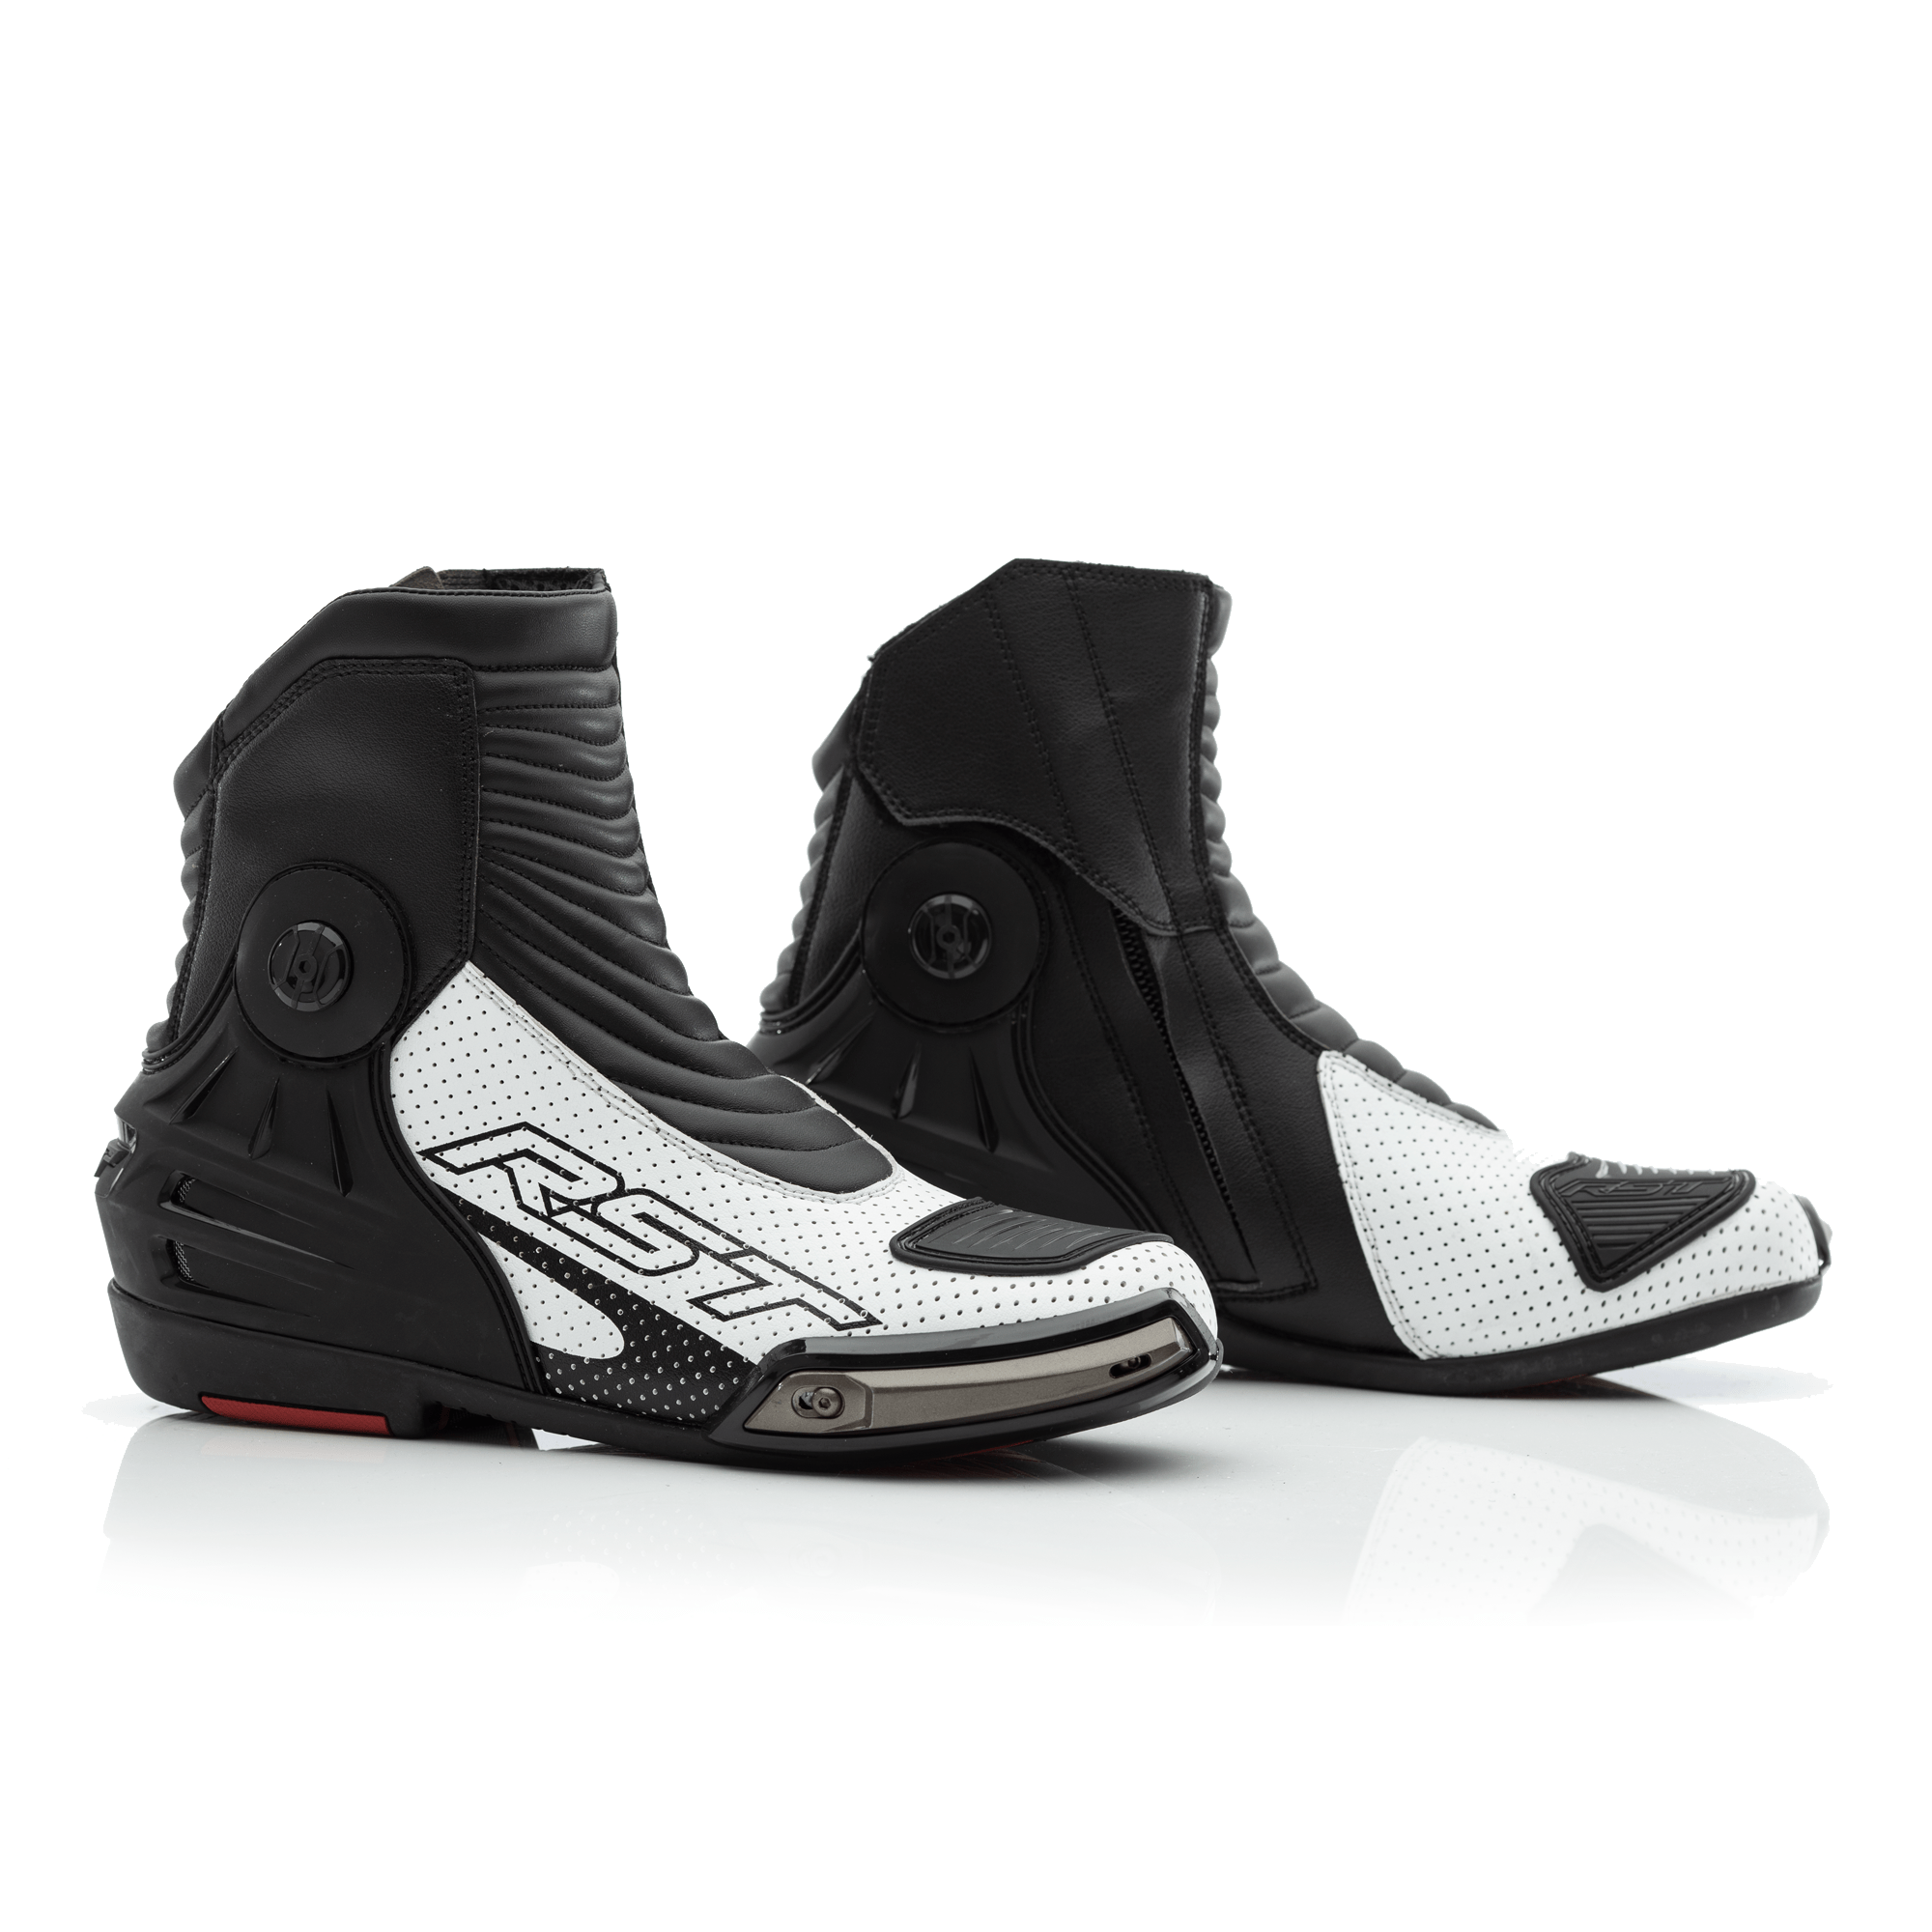 Western Powersports Boots White/Black / 7 Tractech EVO III Short CE Boot by RST 102341WHI-40